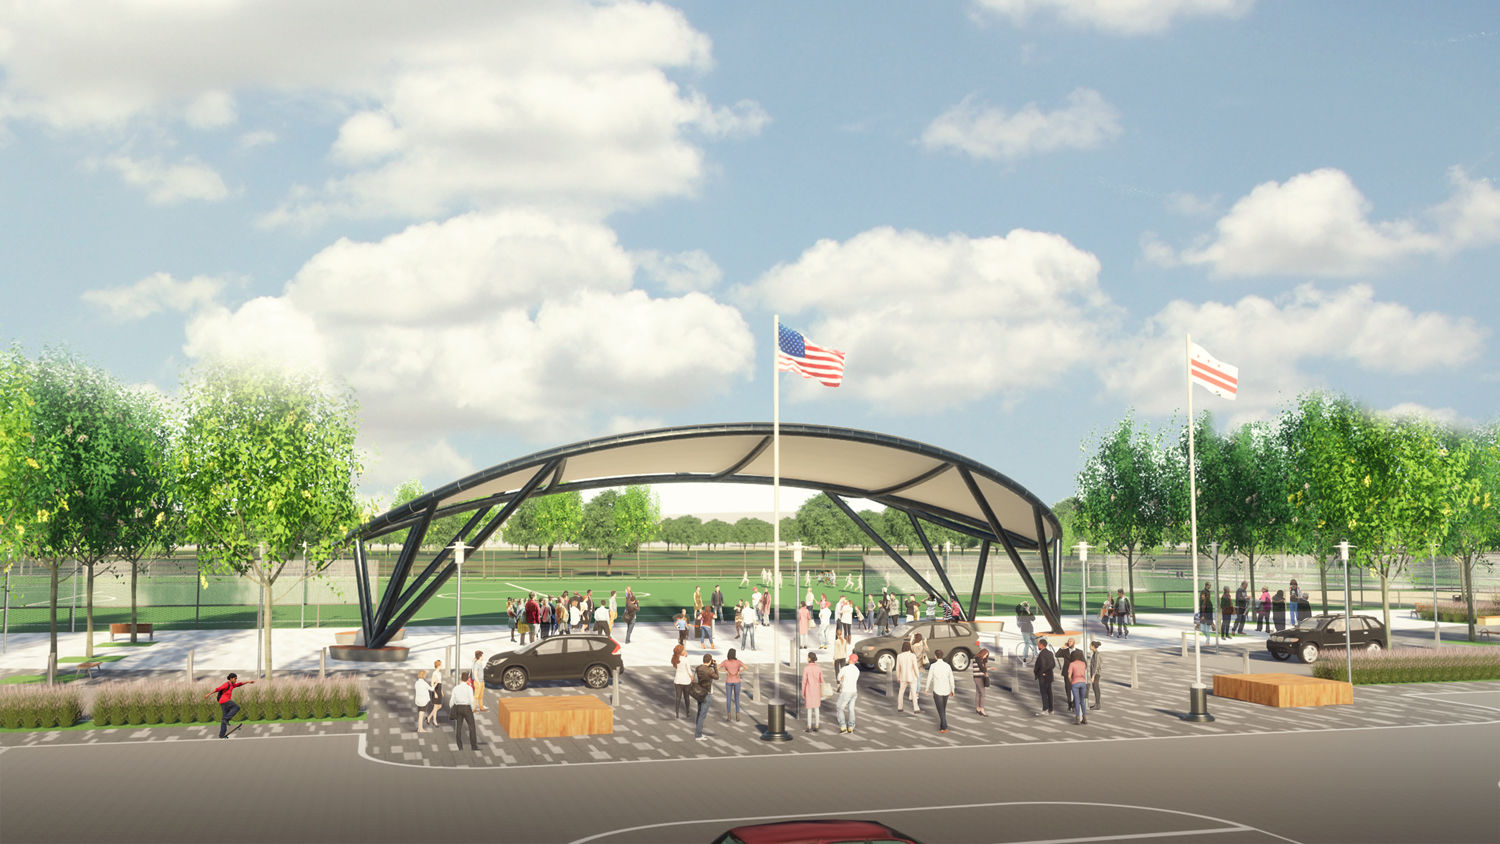 A pavilion will serve as an official entrance from the parking area next to the middle field. (Courtesy: Events DC)